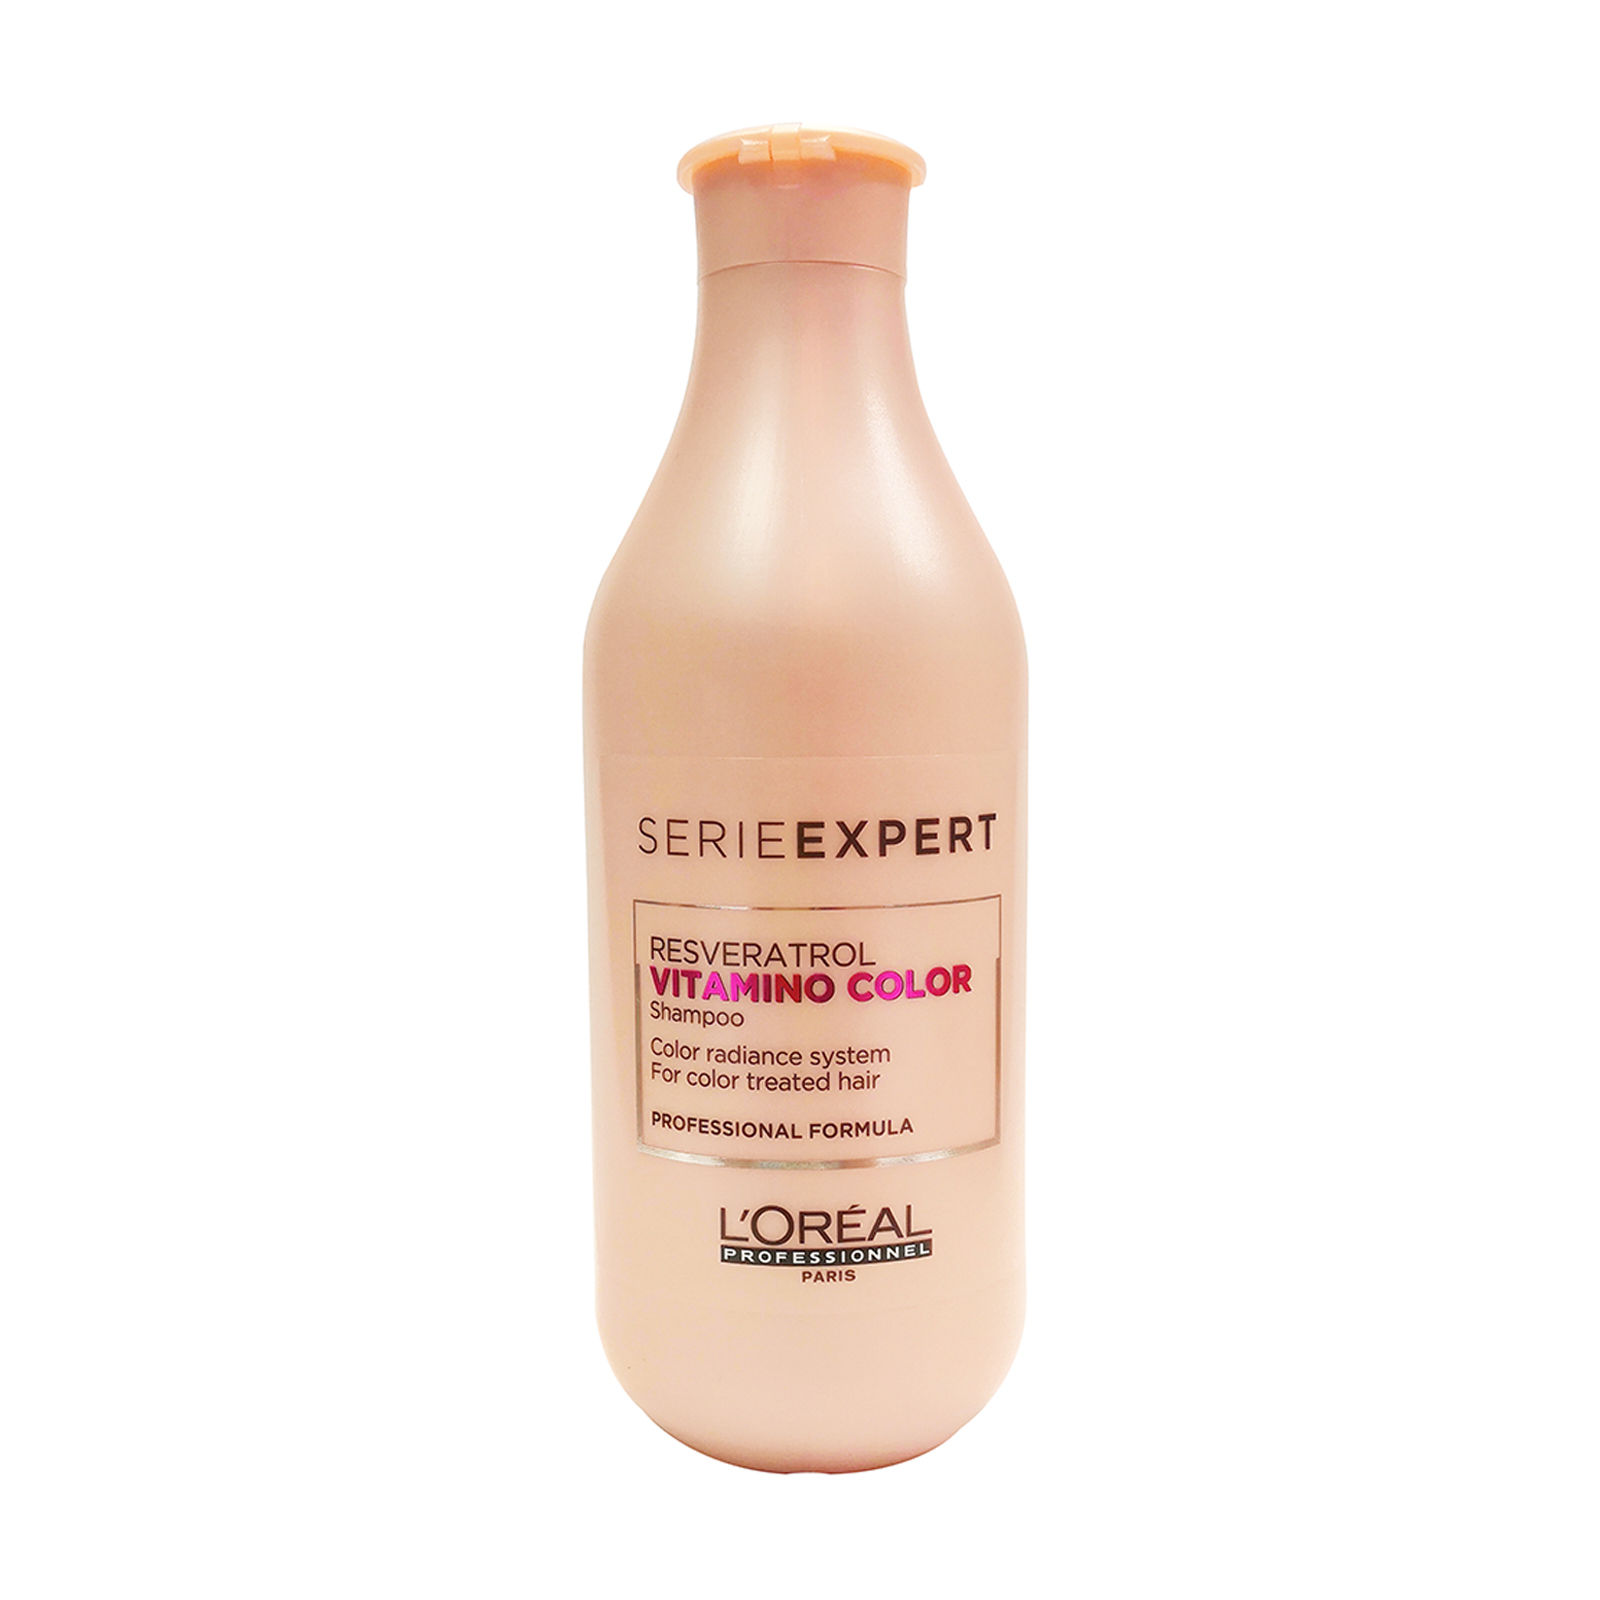 Loreal Professionnel Series Expert Resveratrol Vitamino Color Shampoo Buy Loreal Professionnel Series Expert Resveratrol Vitamino Color Shampoo Online At Best Price In India Nykaa